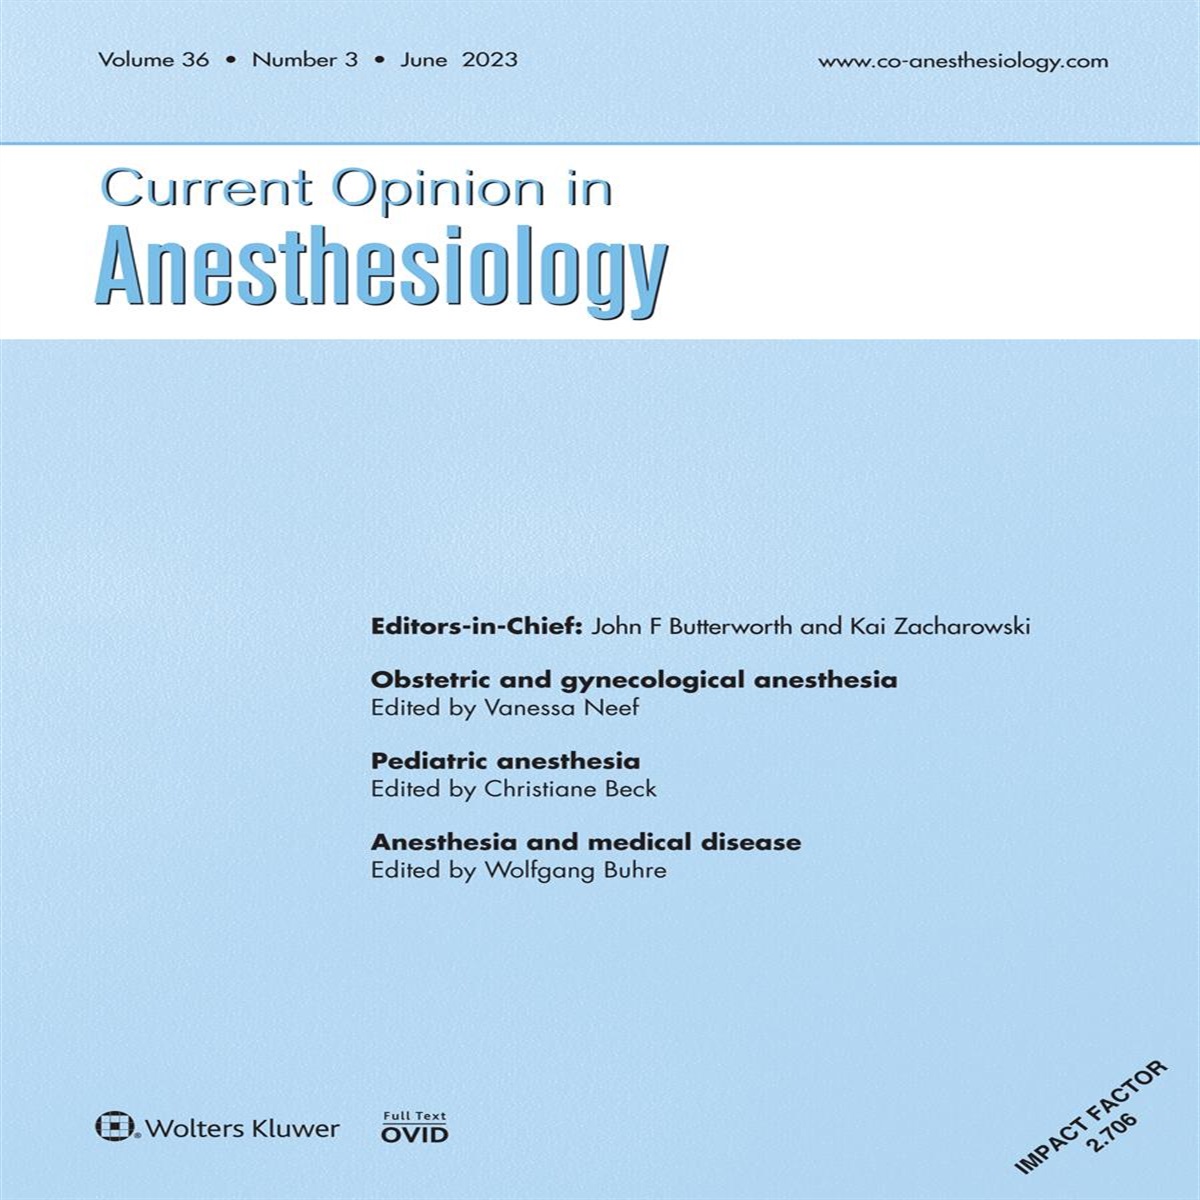 Where to start with quality in pediatric anesthesia?